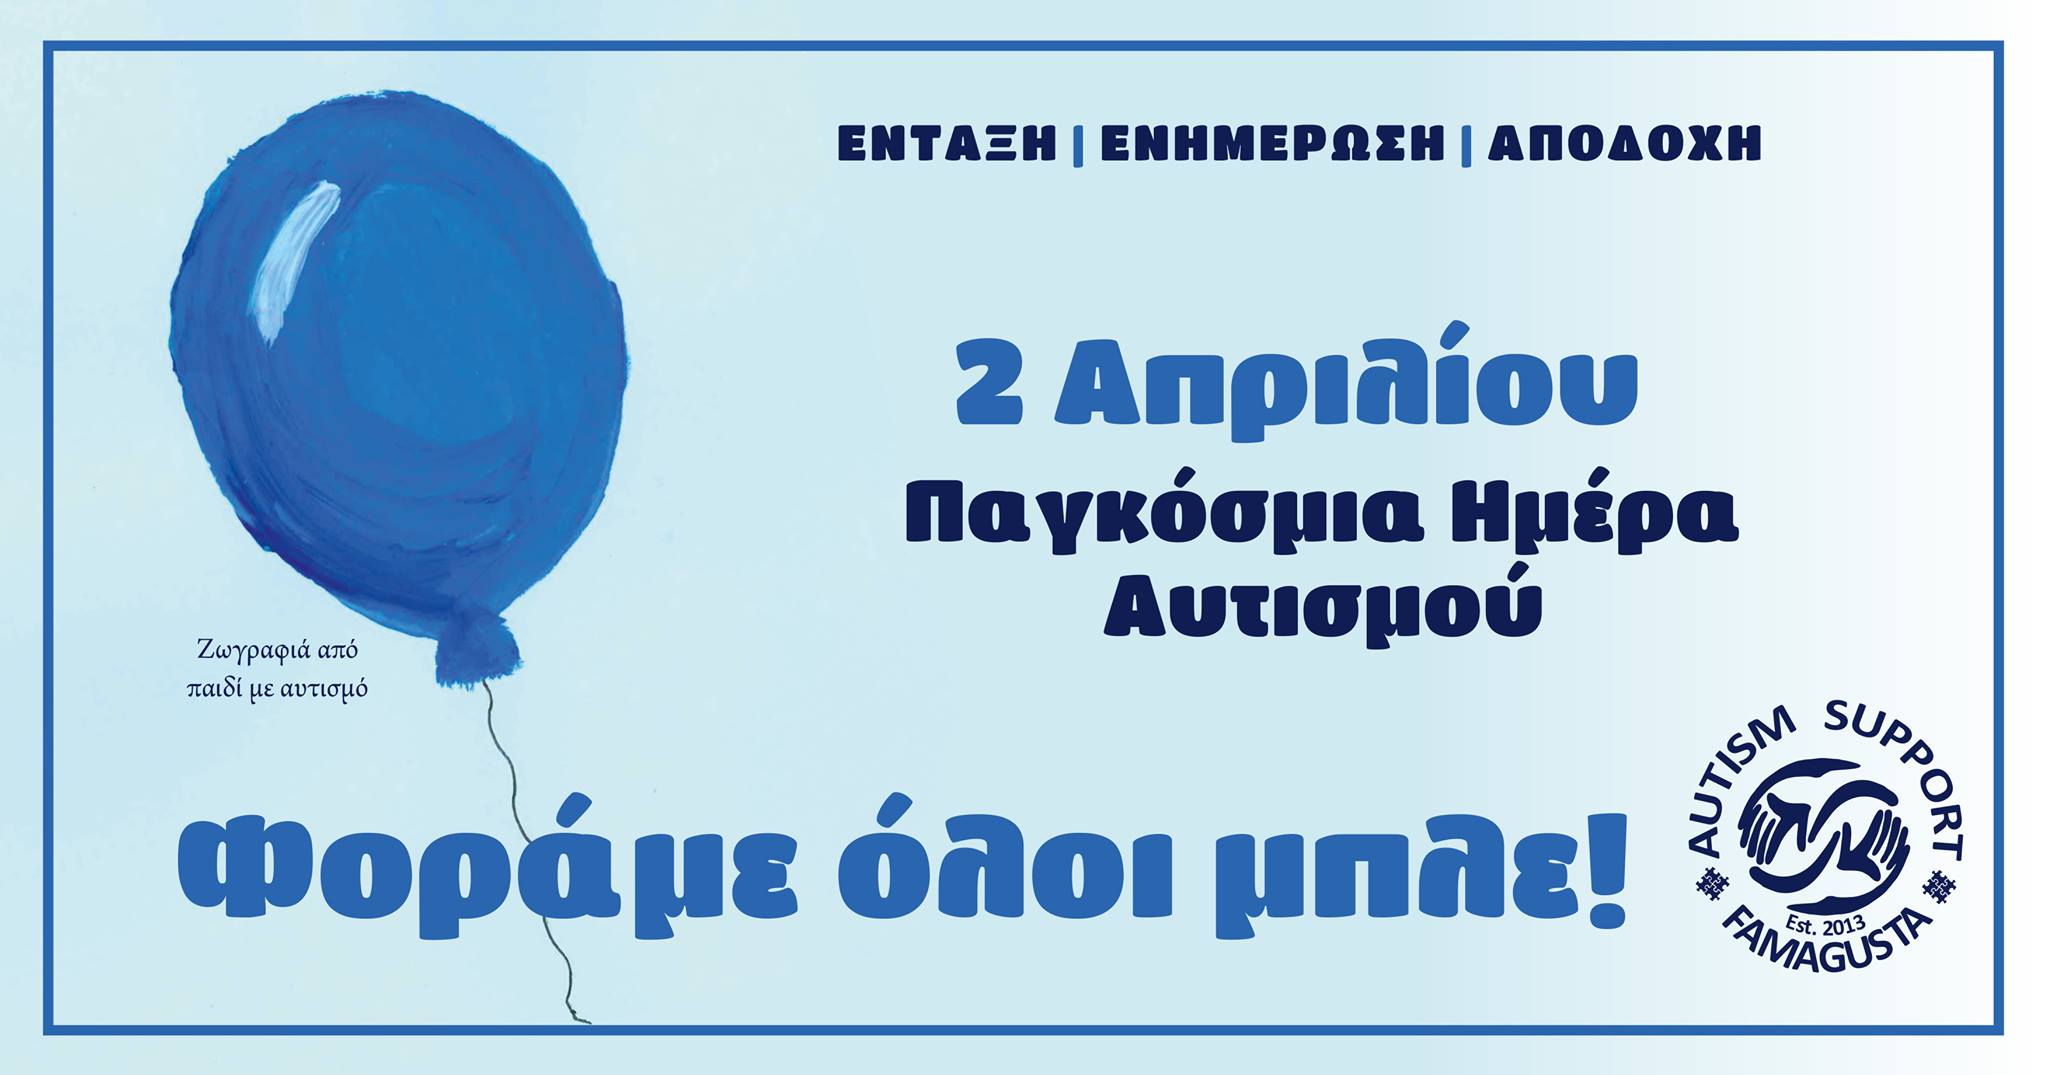 167133345 294836865330892 8249998427329249071 n Autism Support Famagusta, Municipality of Sotiras, Famagusta Autism Support Association